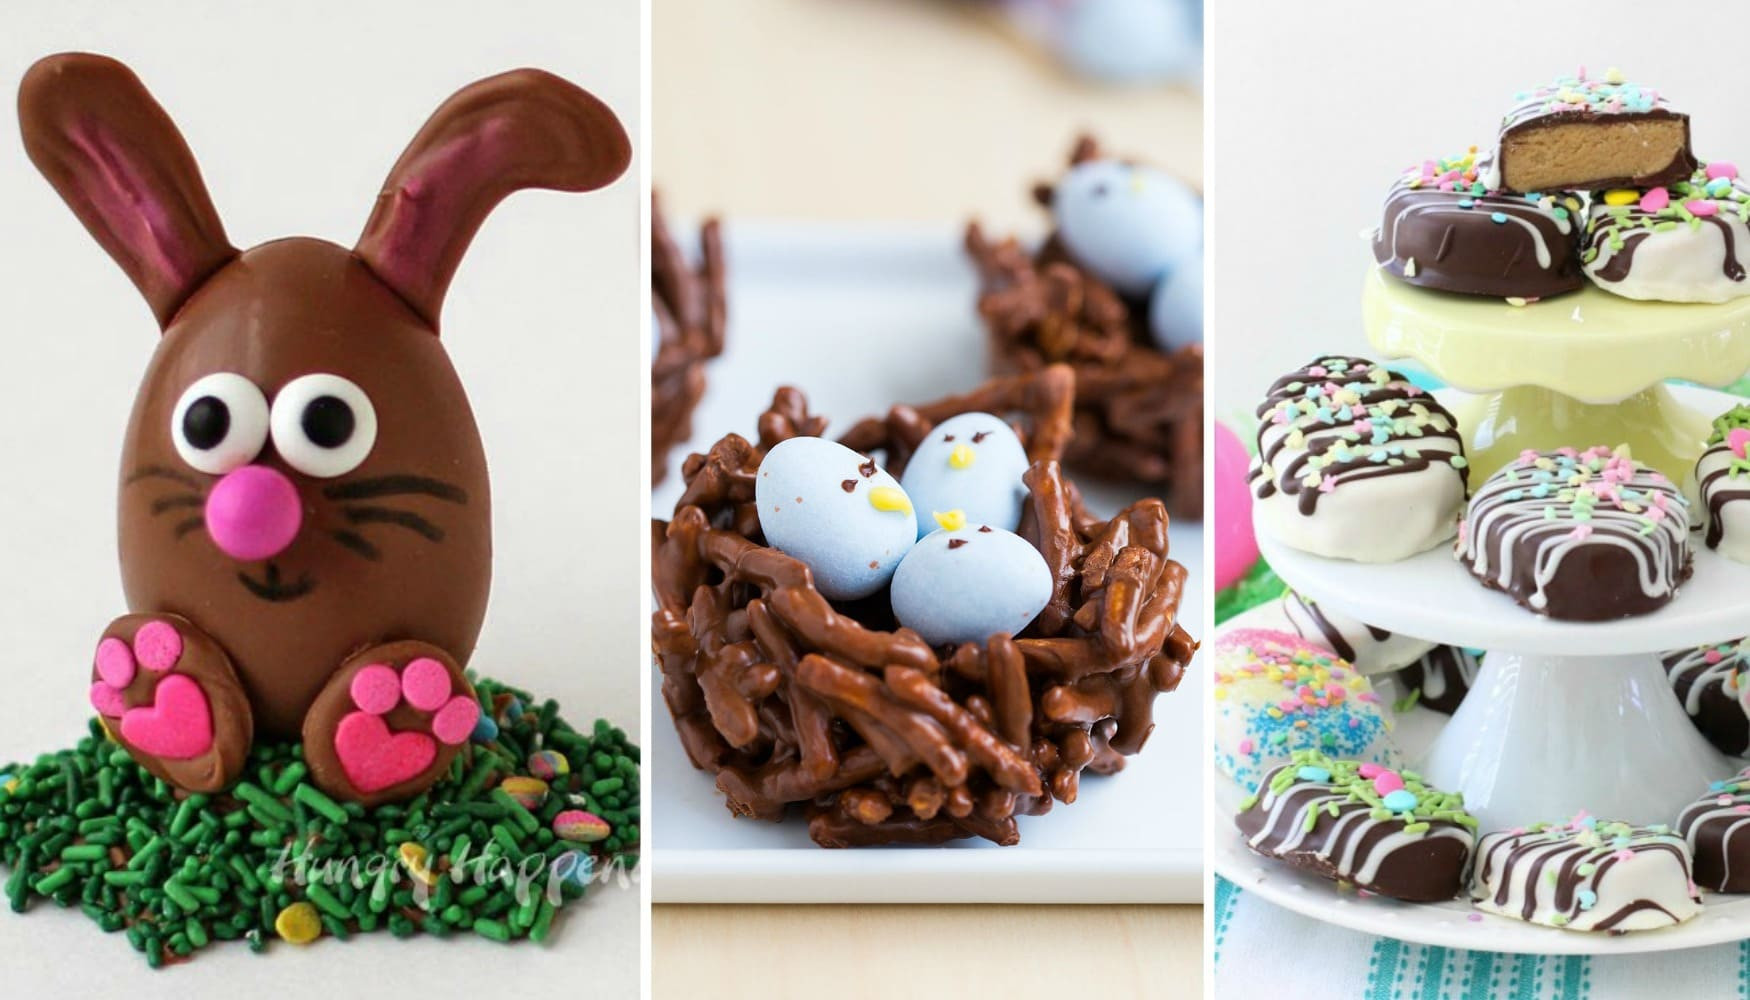 Best Easter Desserts
 25 of the Best Easter Desserts to Serve Your Guest